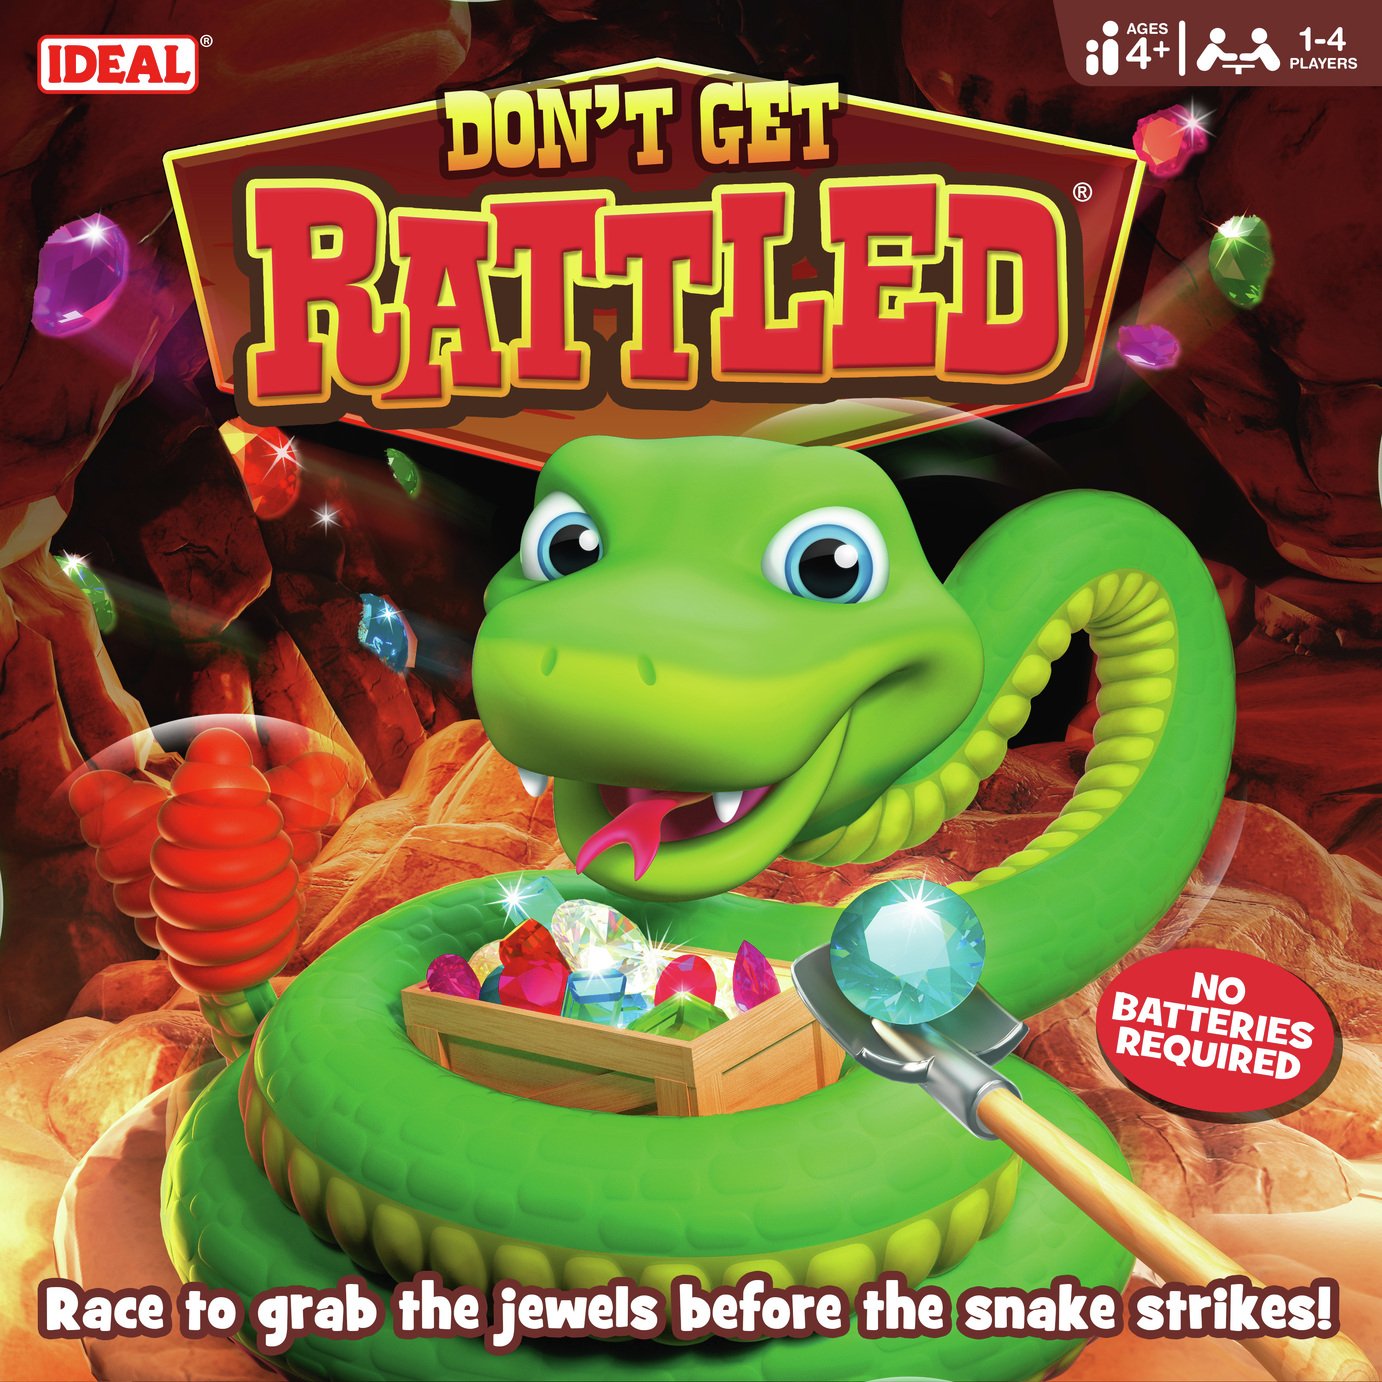 Ideal Dont Get Rattled Game Review